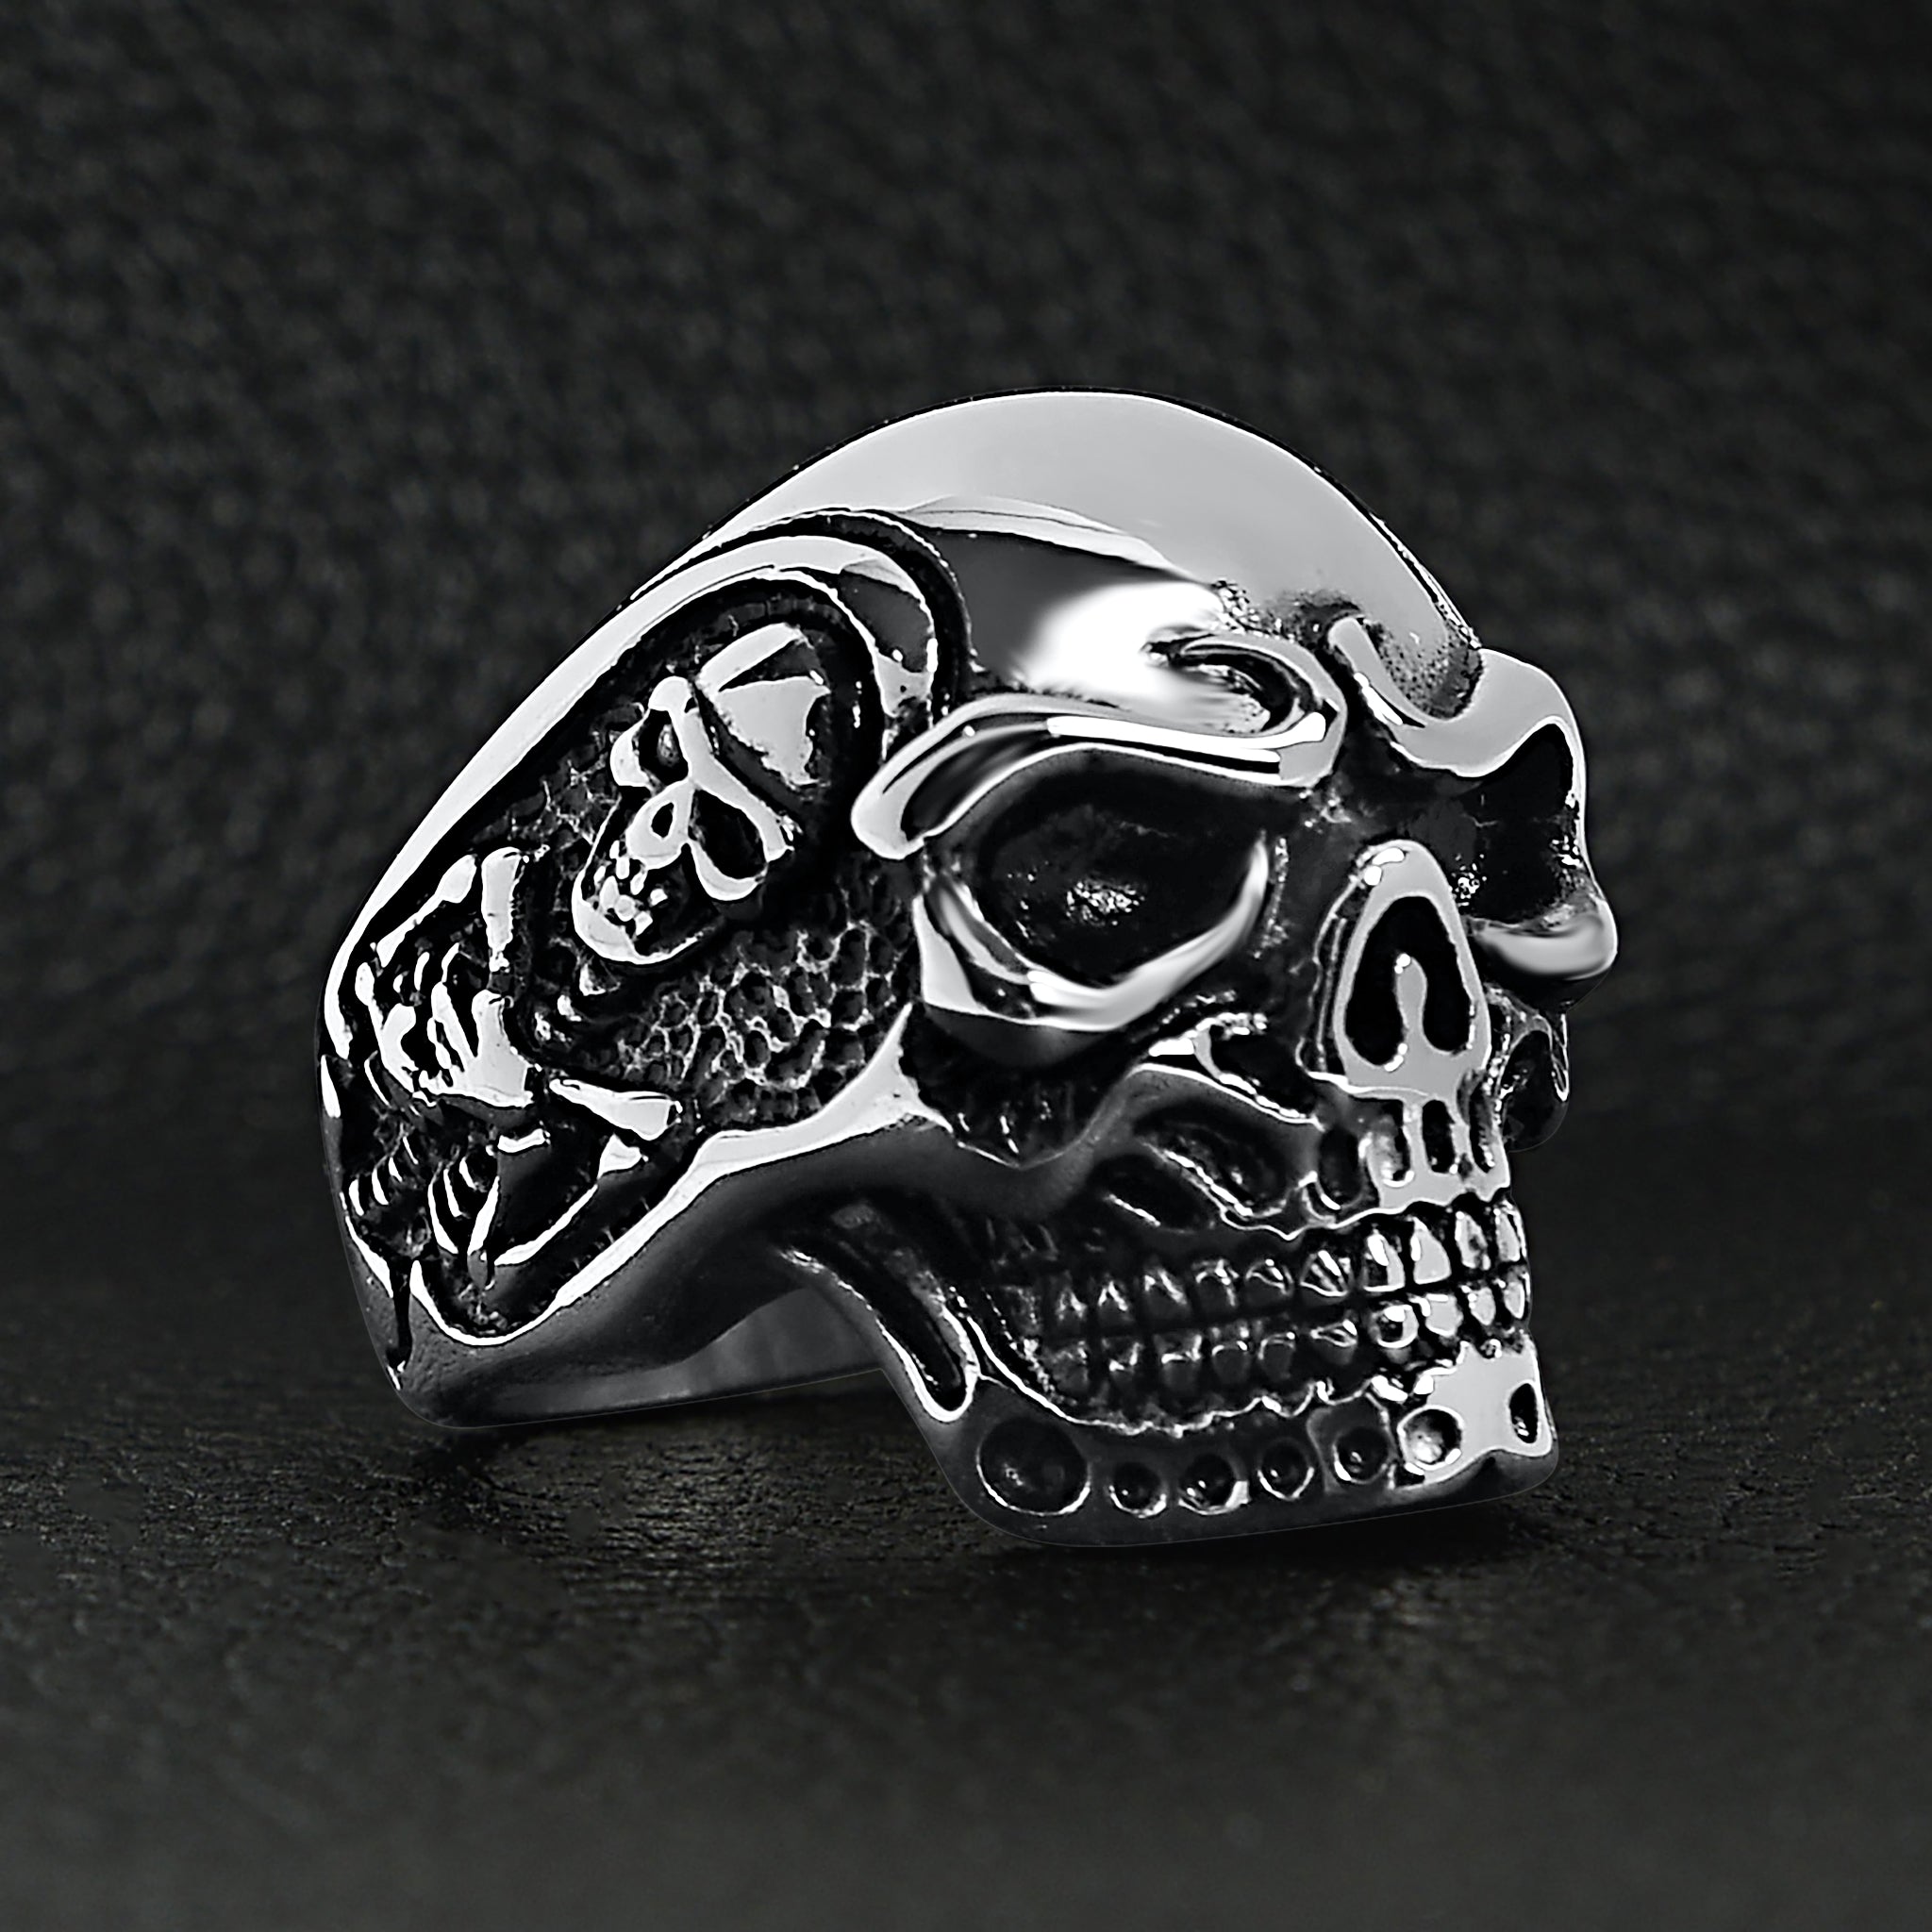 Stainless Steel Skull Ring with Skeleton Accents - Durable and Hypoallergenic - Jewelry & Watches - Bijou Her -  -  - 